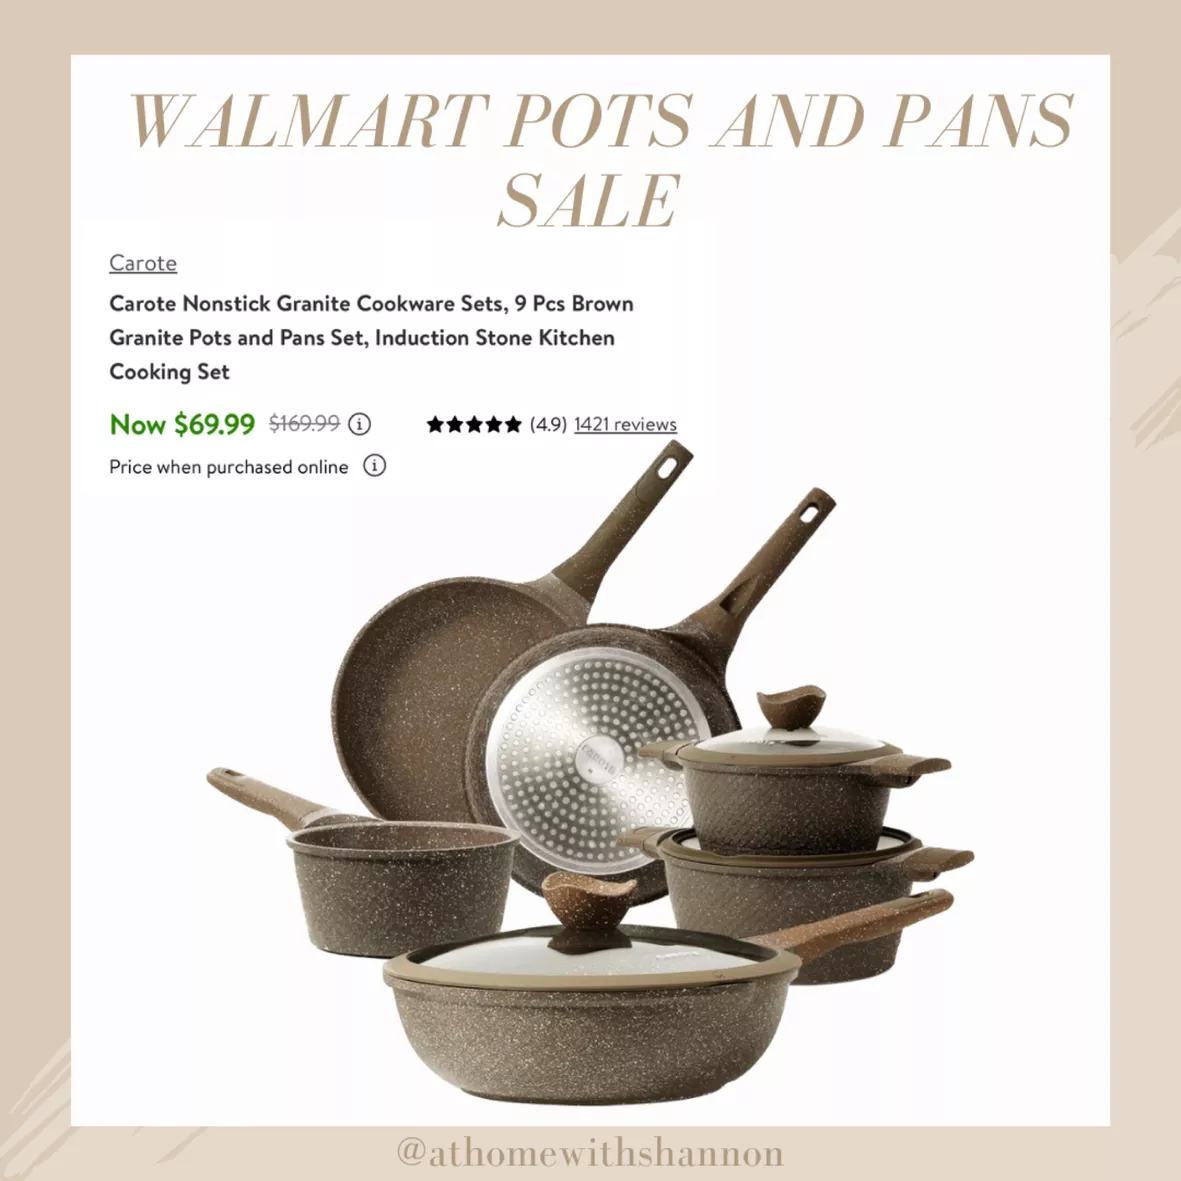 Carote Nonstick Pots and Pans Set, Granite Stone Kitchen Cookware